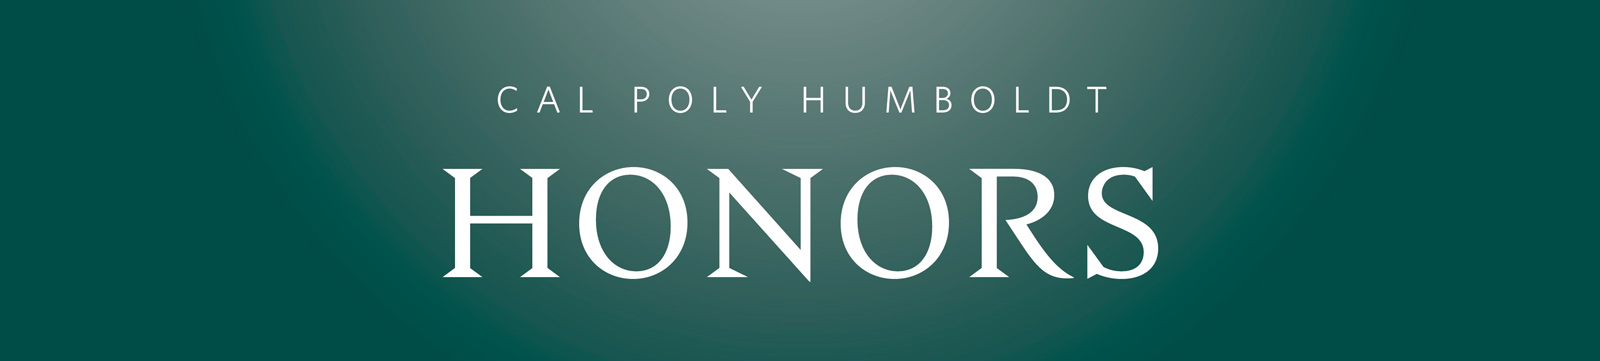 cal poly humboldt honors